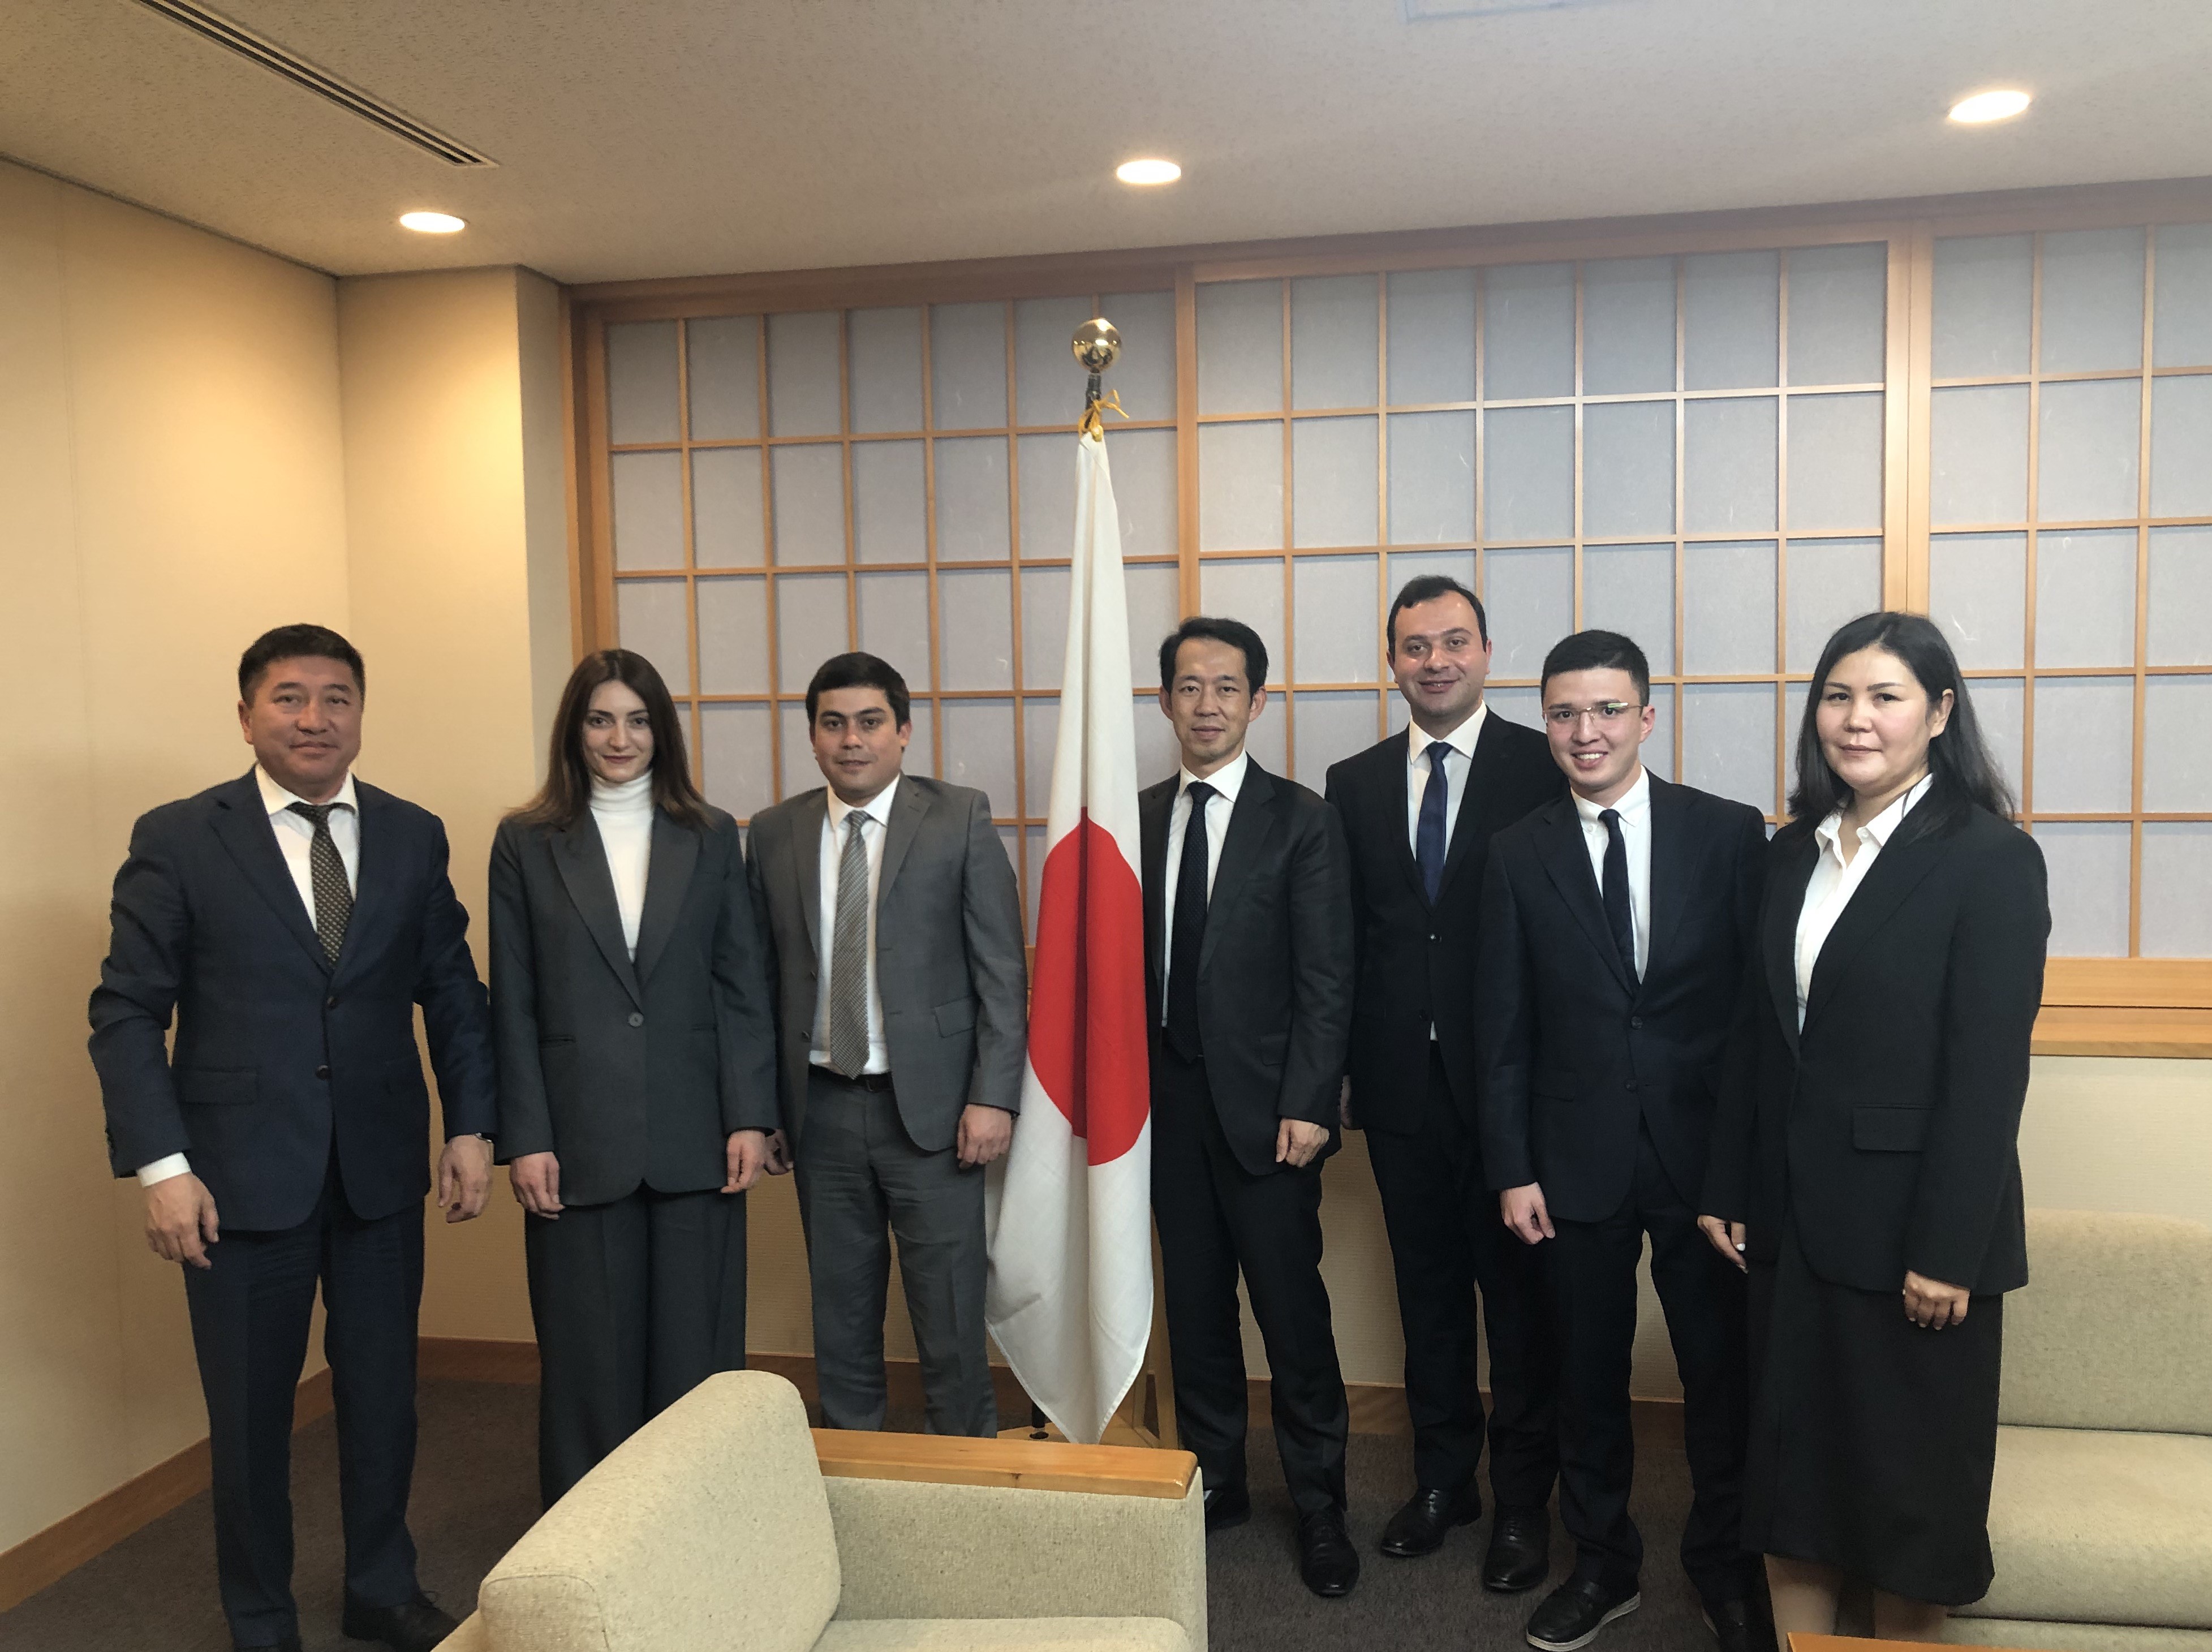 ISTC 25th Anniversary Young Researcher award winners participated in a trip to Japan and met with the Japan’s Ministry of Foreign Affairs